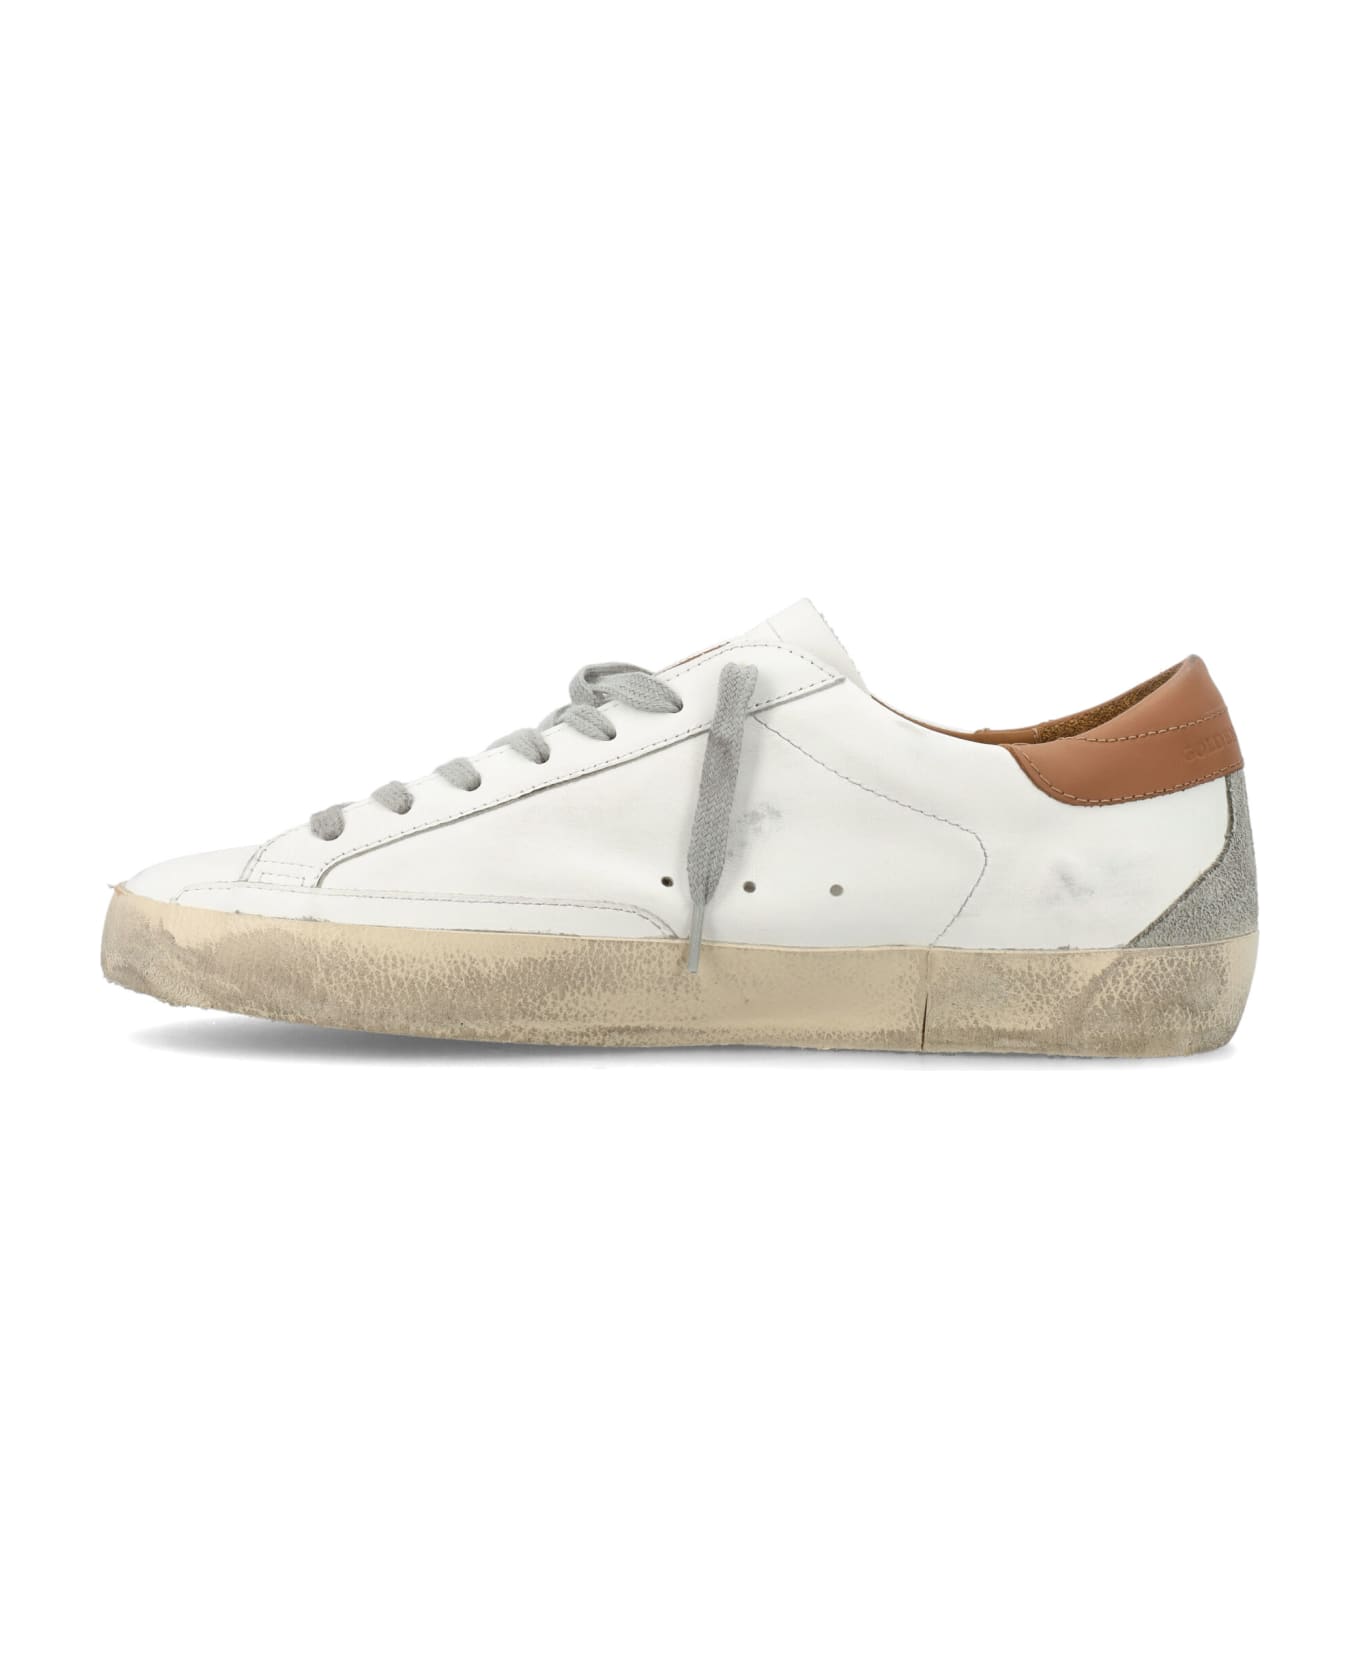 Golden Goose Superstar Classic Sneakers - White/Ice/Light Brown